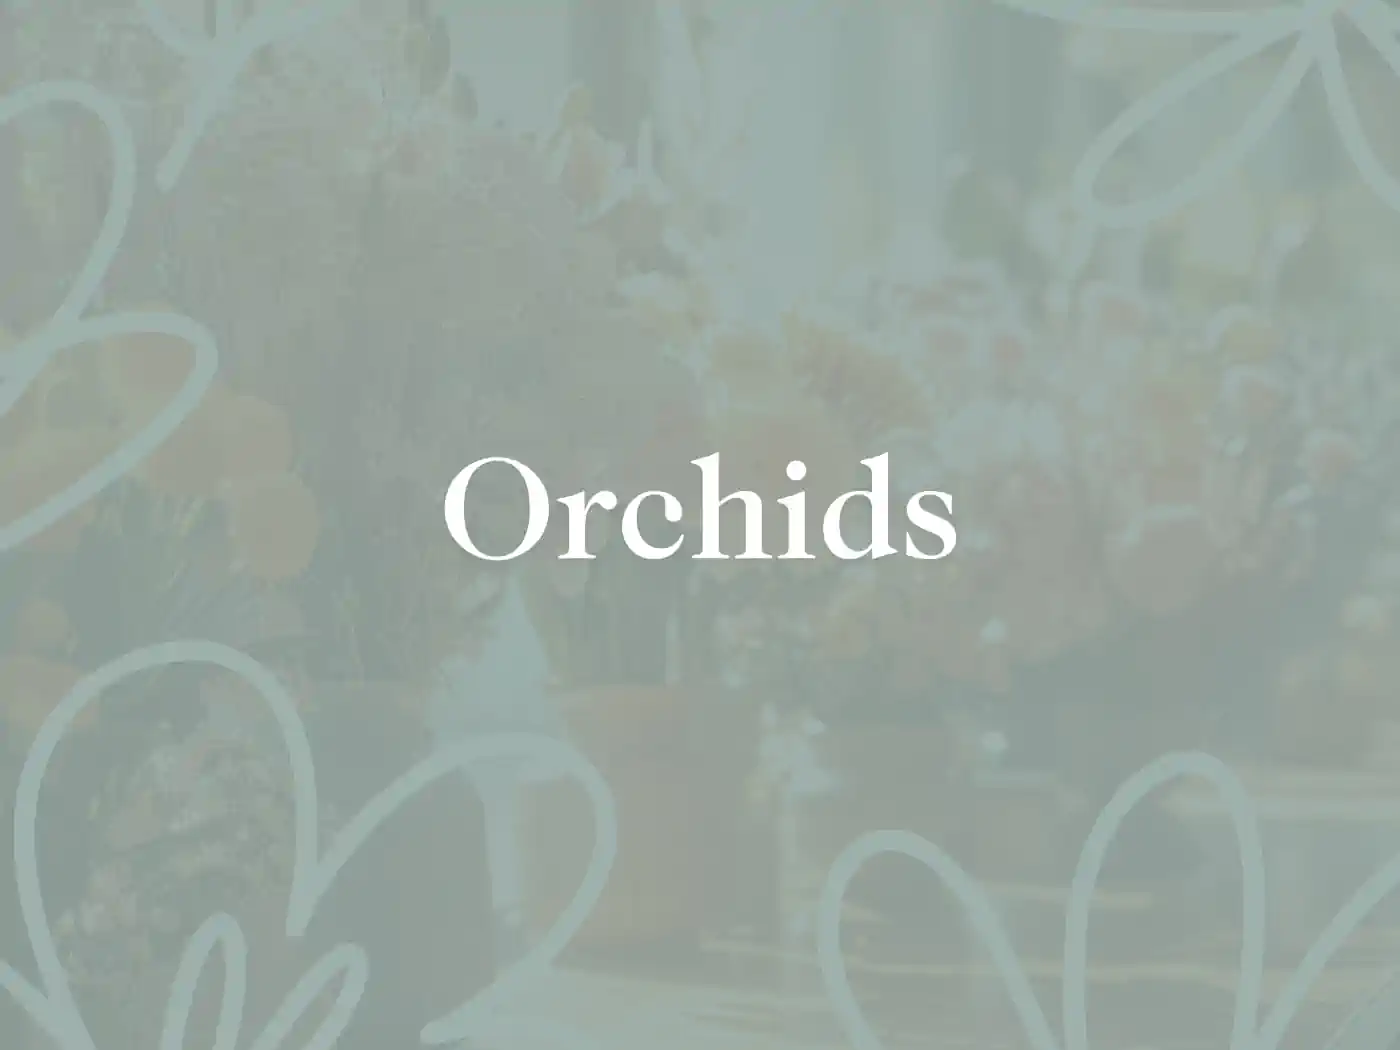 A background image with a soft floral pattern overlayed with the text "Orchids". Fabulous Flowers and Gifts - Orchids Collection.